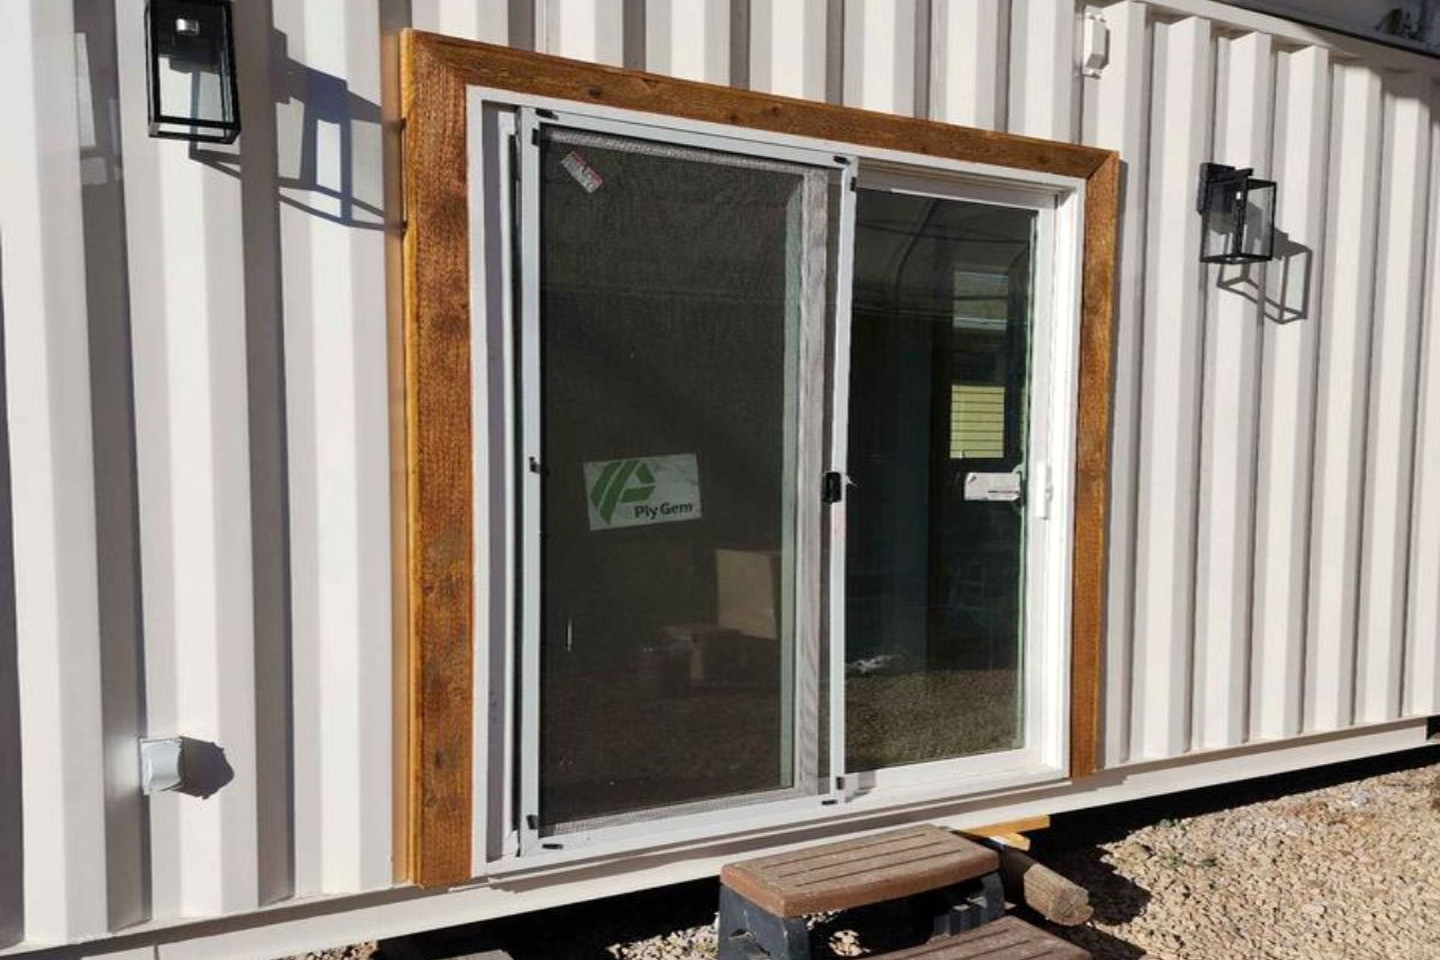 #This 40′ highly insulated tiny home is a converted shipping container house at a pocket-friendly price tag